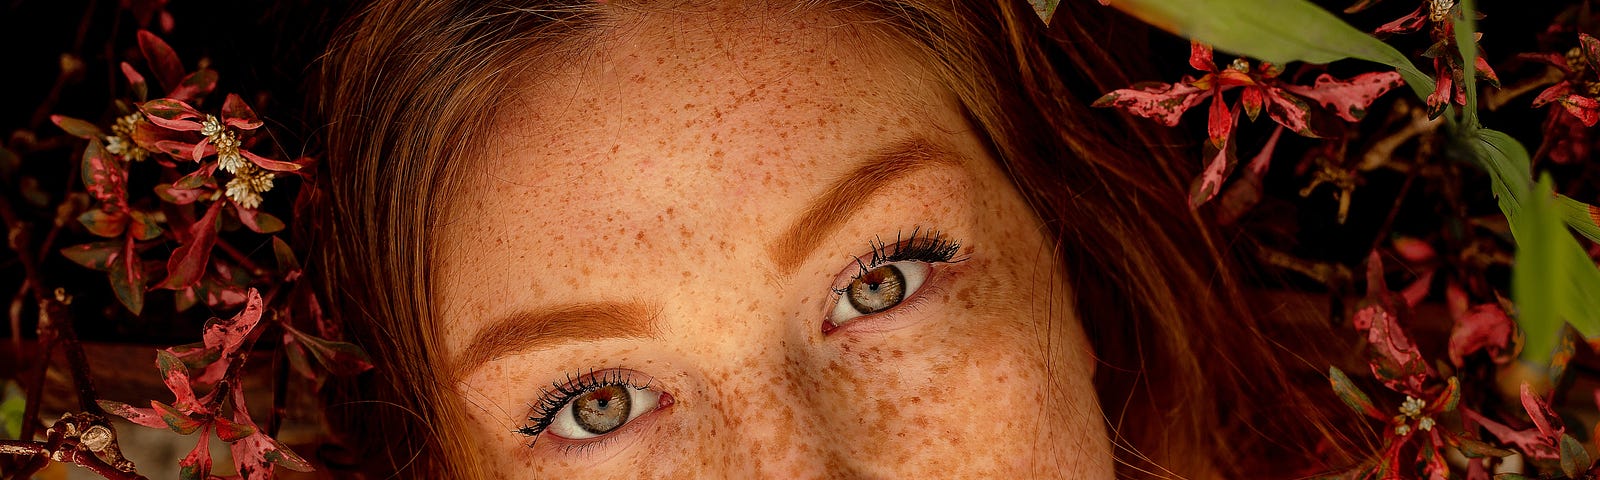 A beautiful girl with ginger hair, hazel eyes, and freckles lies in nature. She stares up and ponders humanity and the interconnection between all.